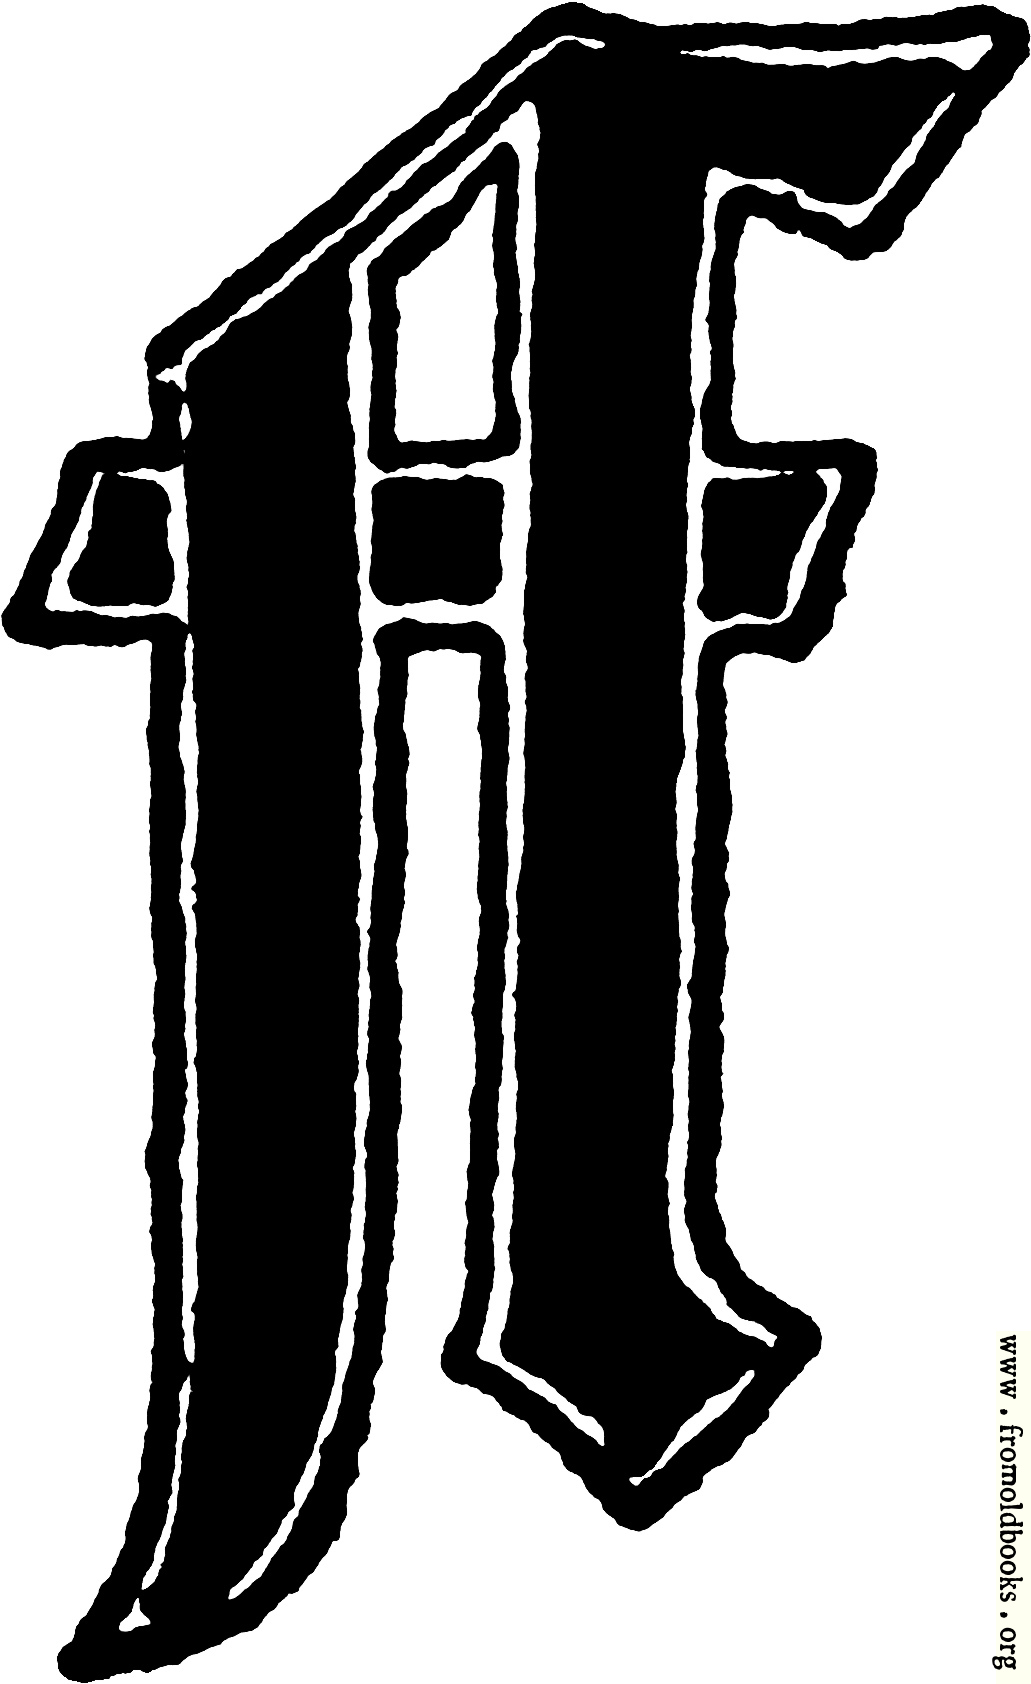 Calligraphic letter “F” in 15th century gothic style